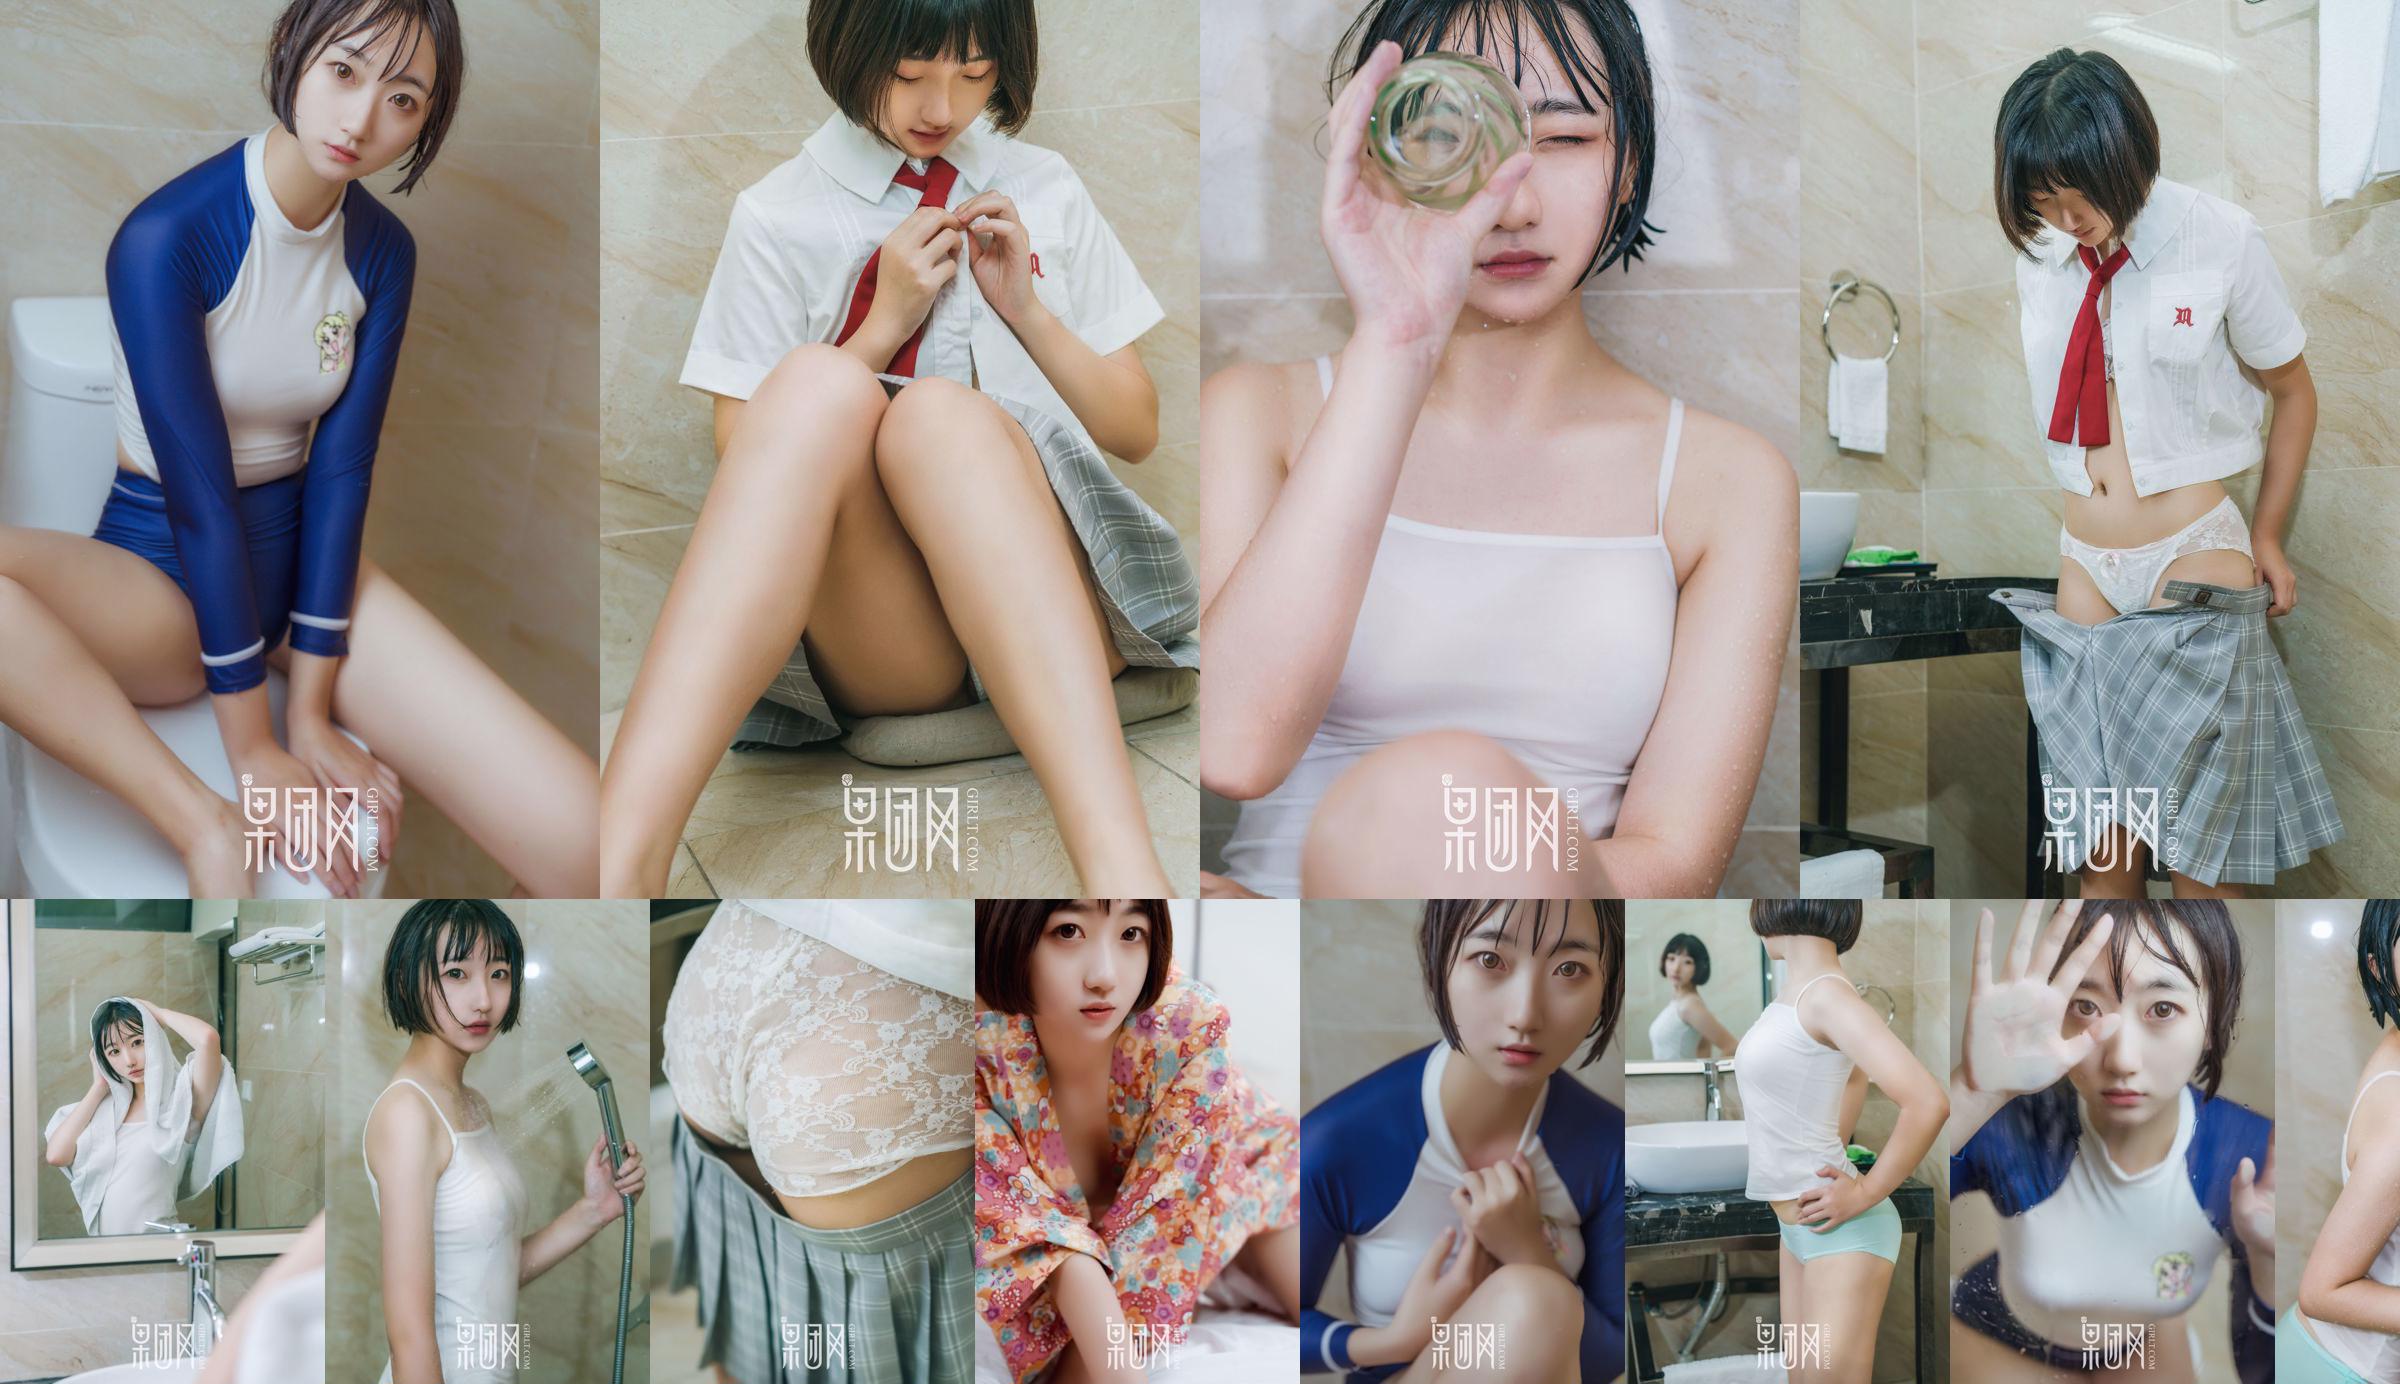 Soft and cute girl Inada Qianhua "Pure Girl" [Guo Group Girl] No.132 No.8caddc Page 1